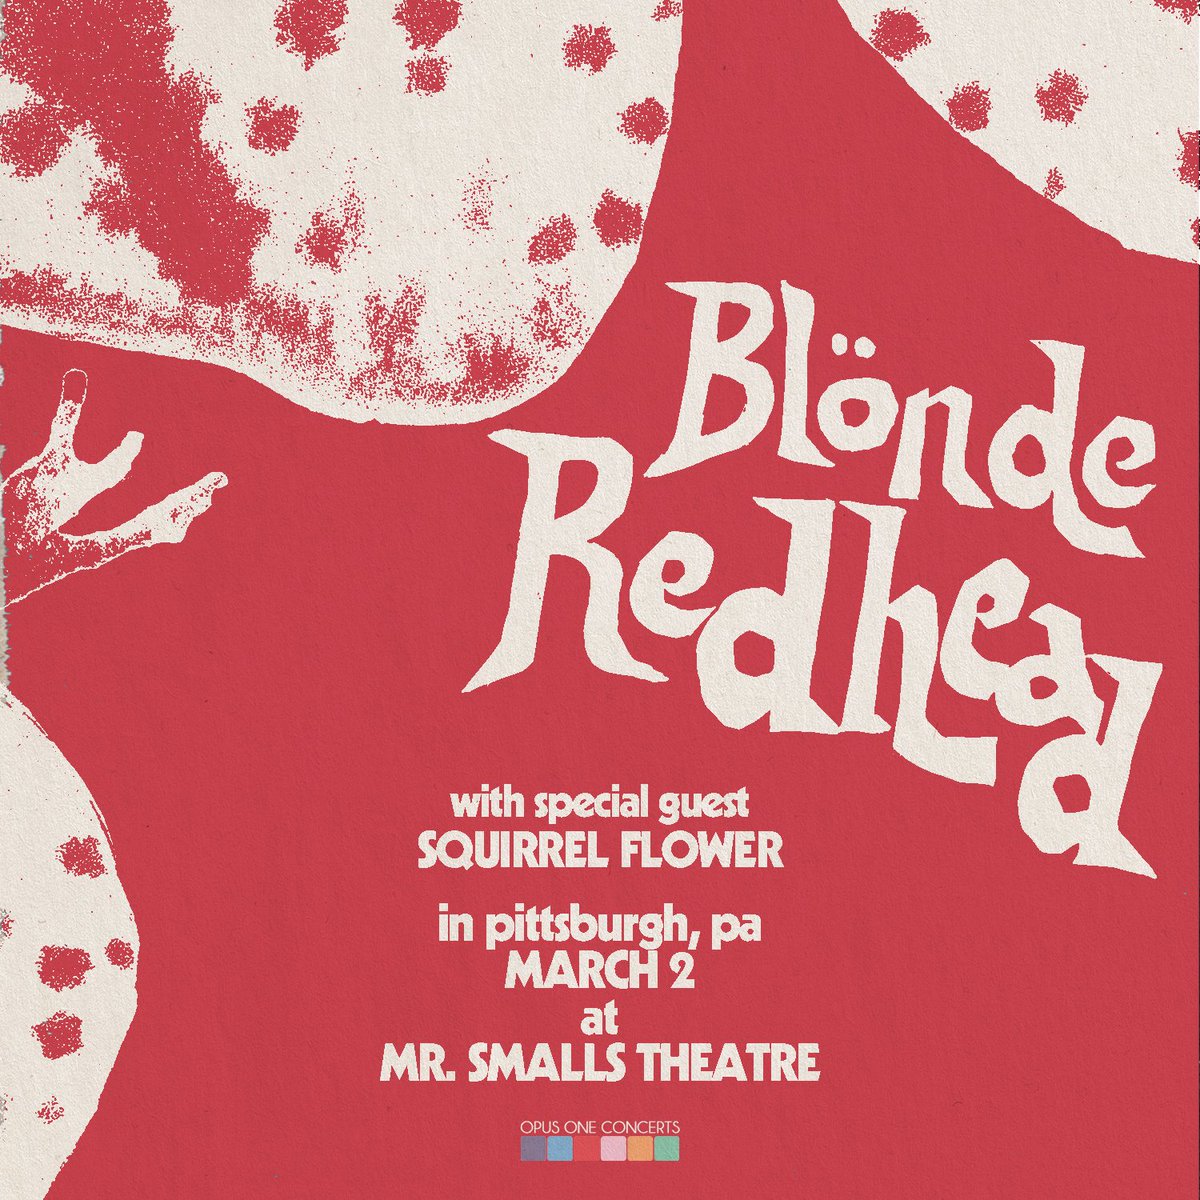 🎶 TONIGHT 🎶 03/02 | @BlondeRedhead with special guest @sqrrlflwr | @MrSmallsTheatre 🎟️ Buy Tickets: tinyurl.com/385s64pz Doors: 7:00pm Tickets are available for purchase online or at the door. #tonight #pghconcerts #mrsmallstheatre #mrsmalls #livemusic #music